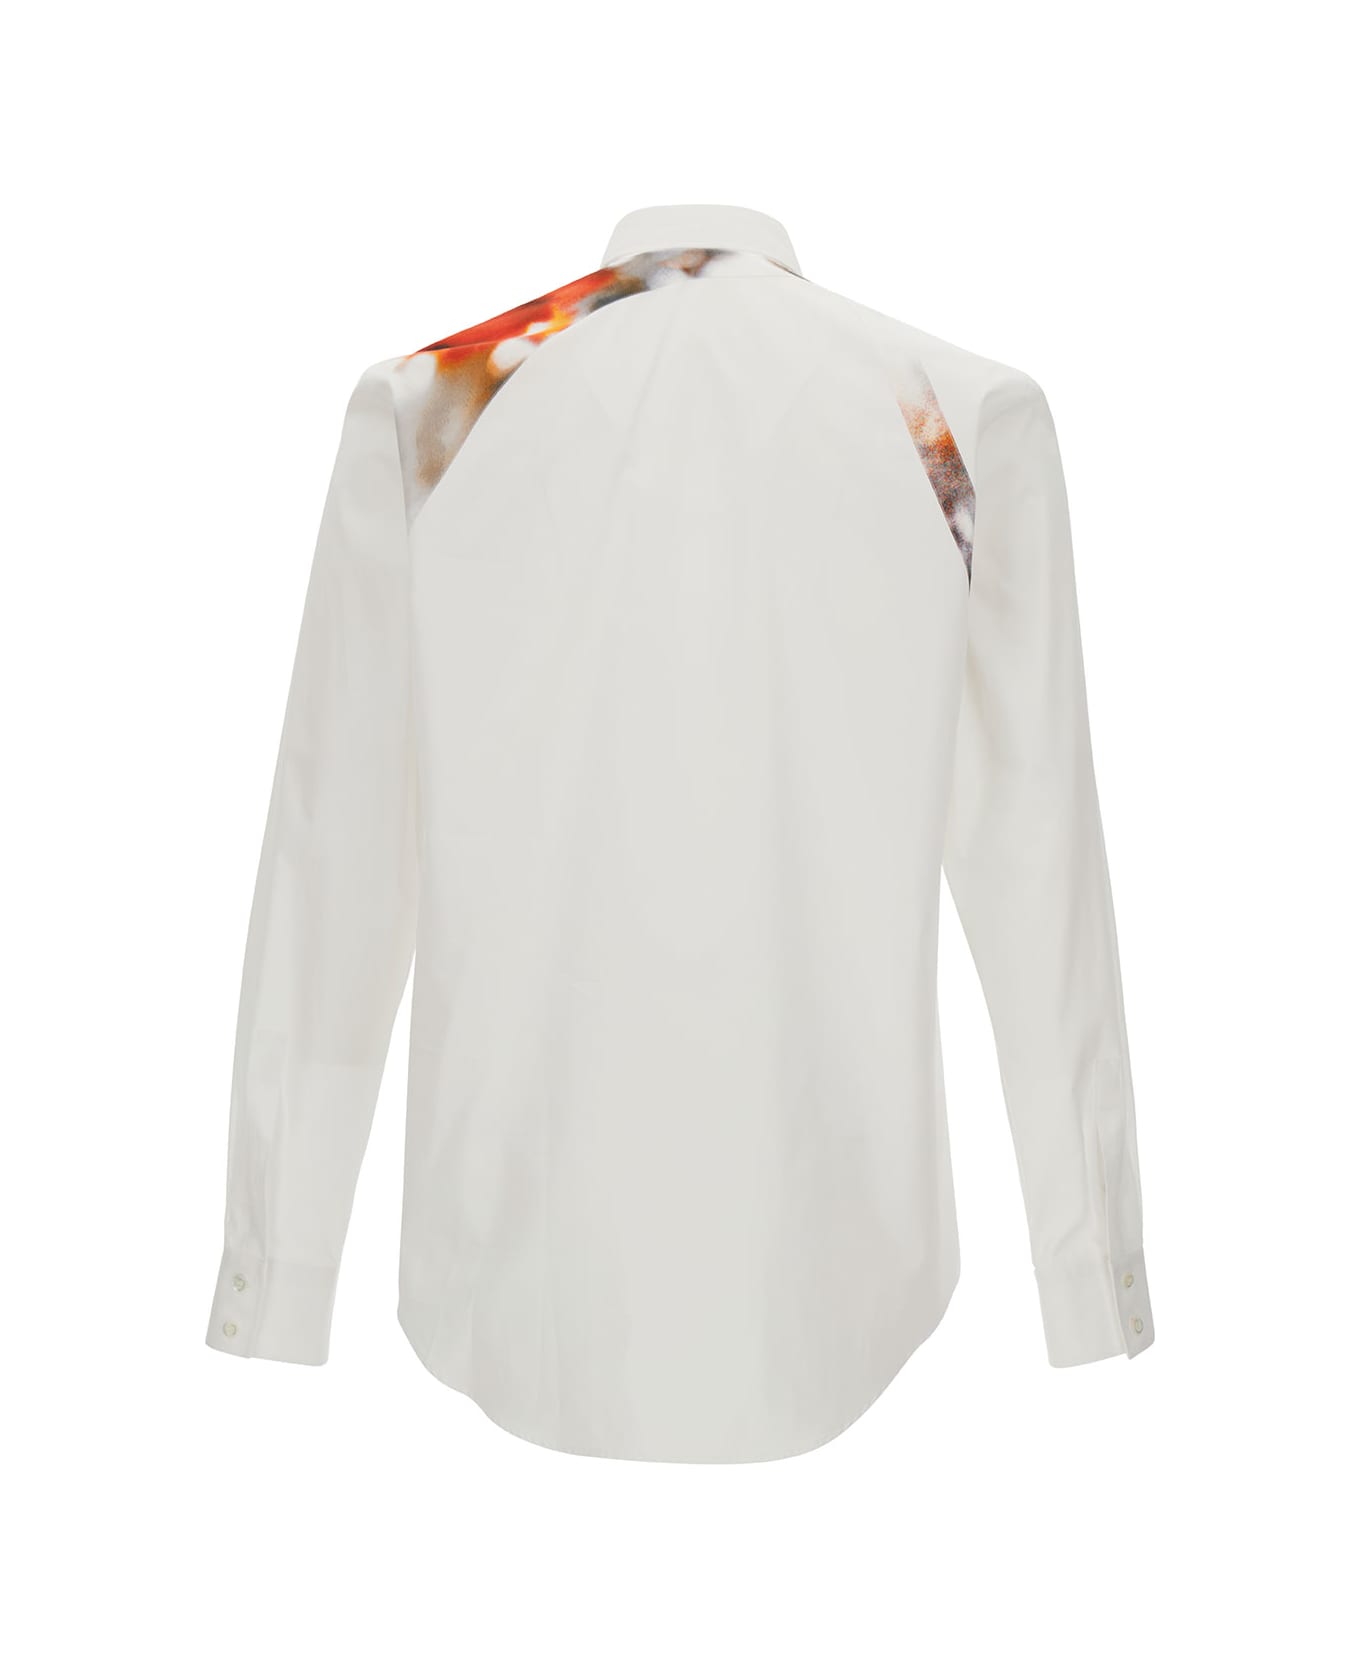 Alexander McQueen White Shirt With Printed Harness In Cotton Man - Optical white